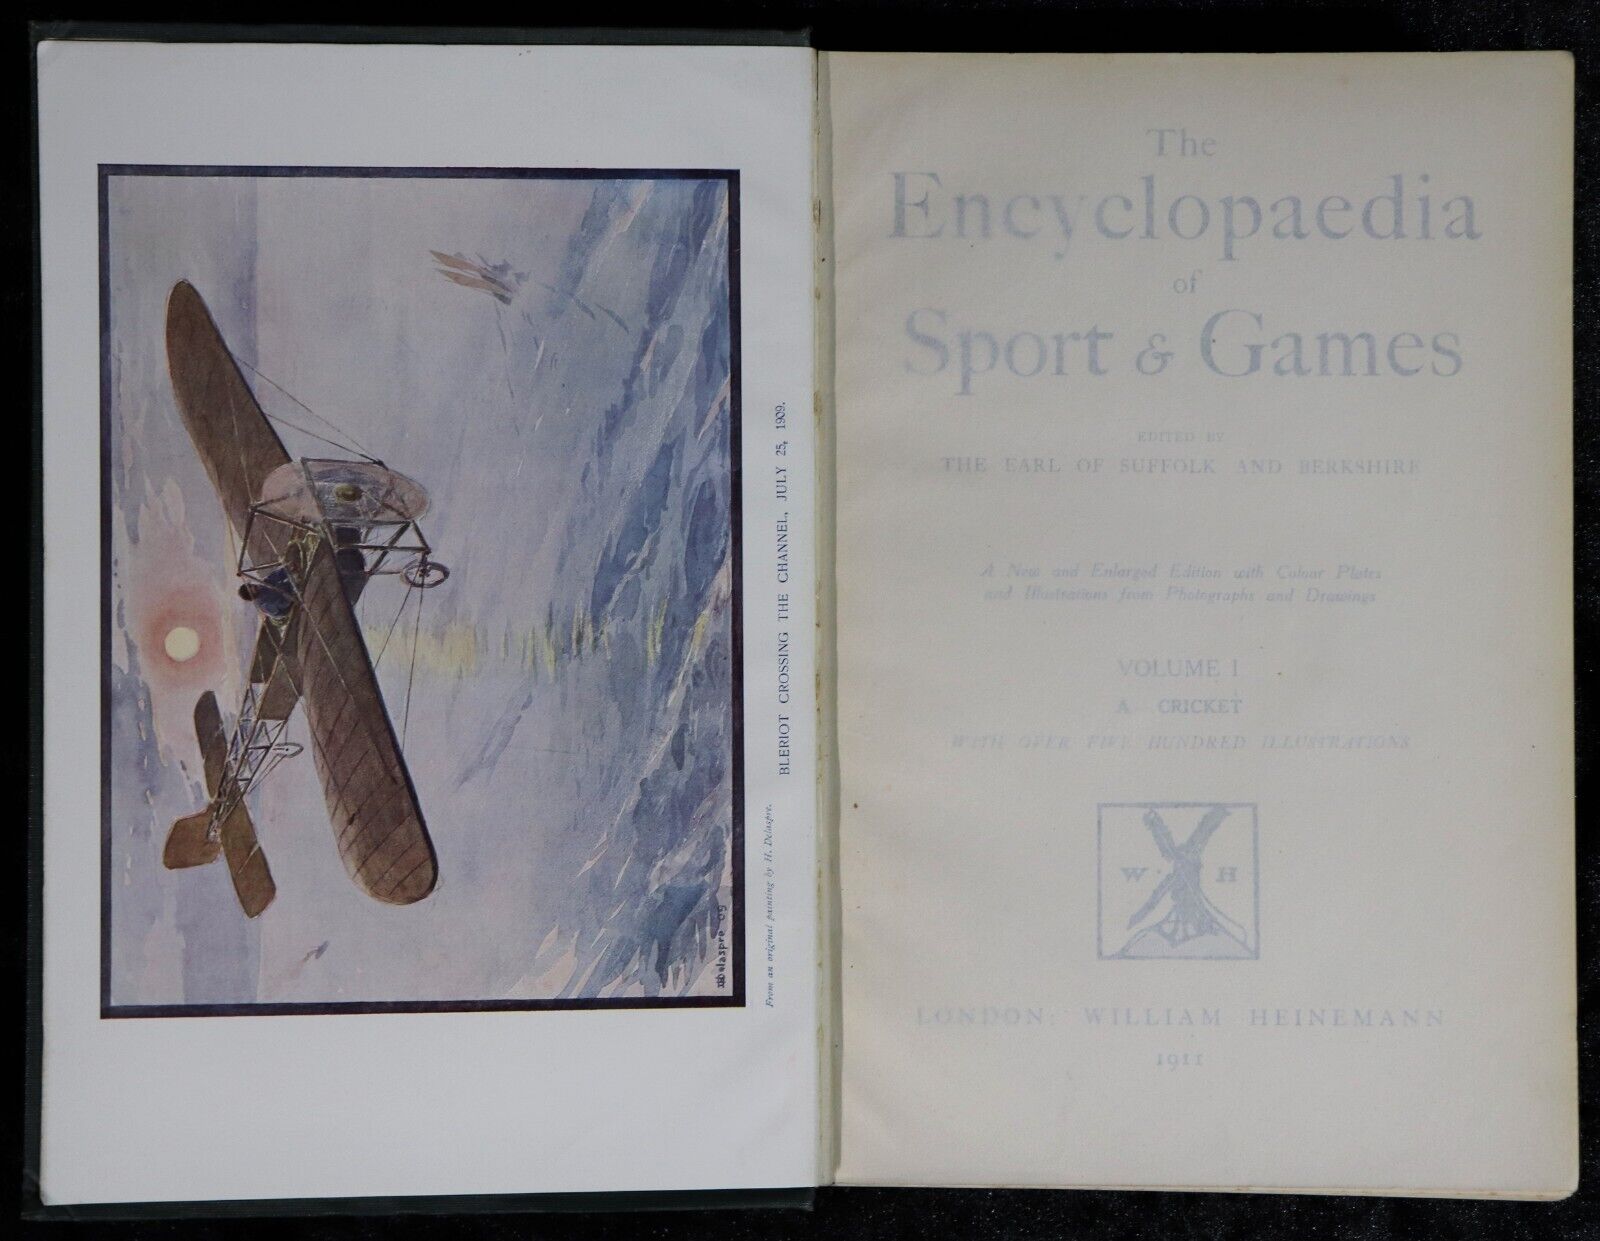 The Encyclopaedia Of Sport & Games - 1911 - 4 Volume Antique Book Set - 0